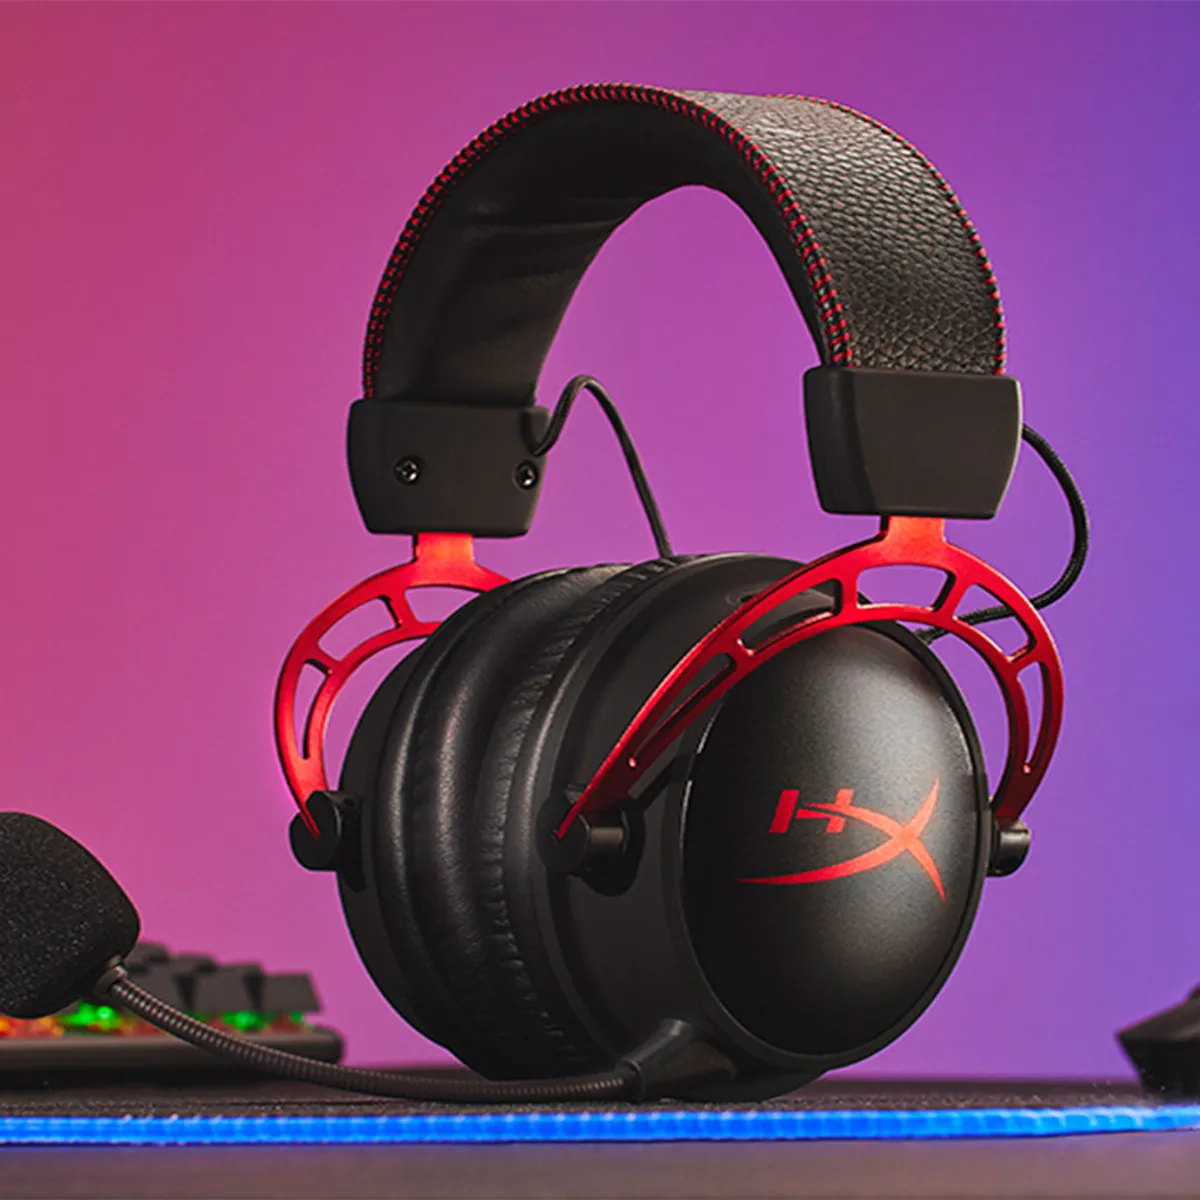 hyperx-headset-woes-troubleshooting-common-issues